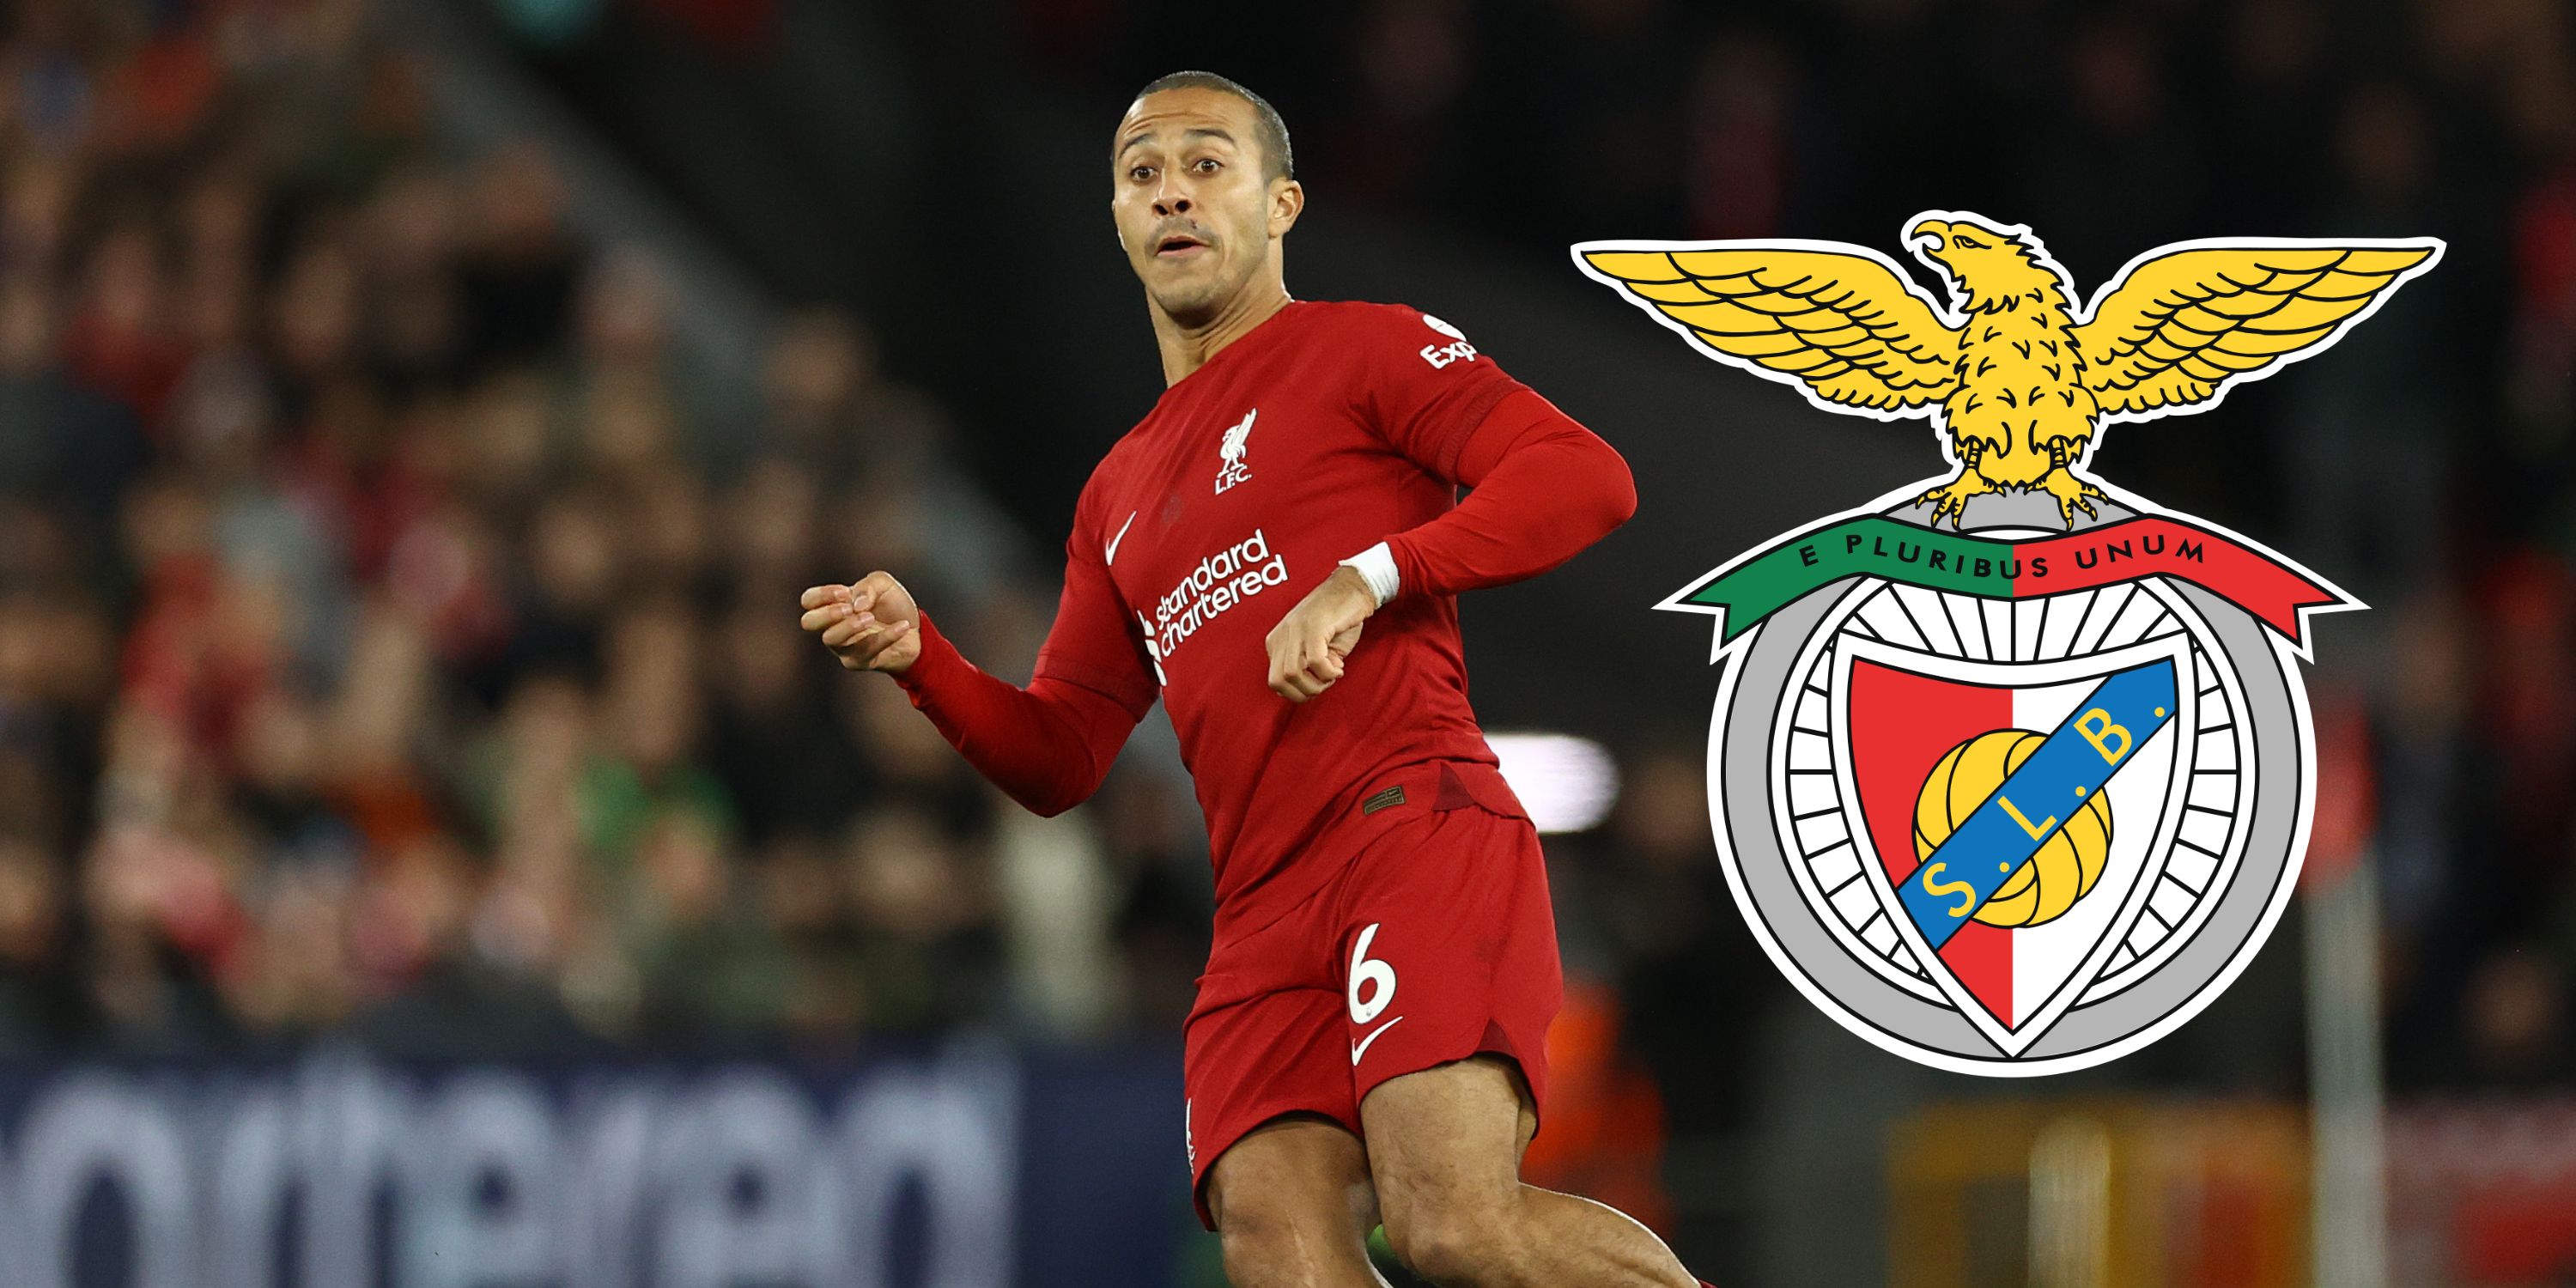 Liverpool scouting midfielder with ‘perfect positioning’; been compared to Thiago Alcantara – Sport